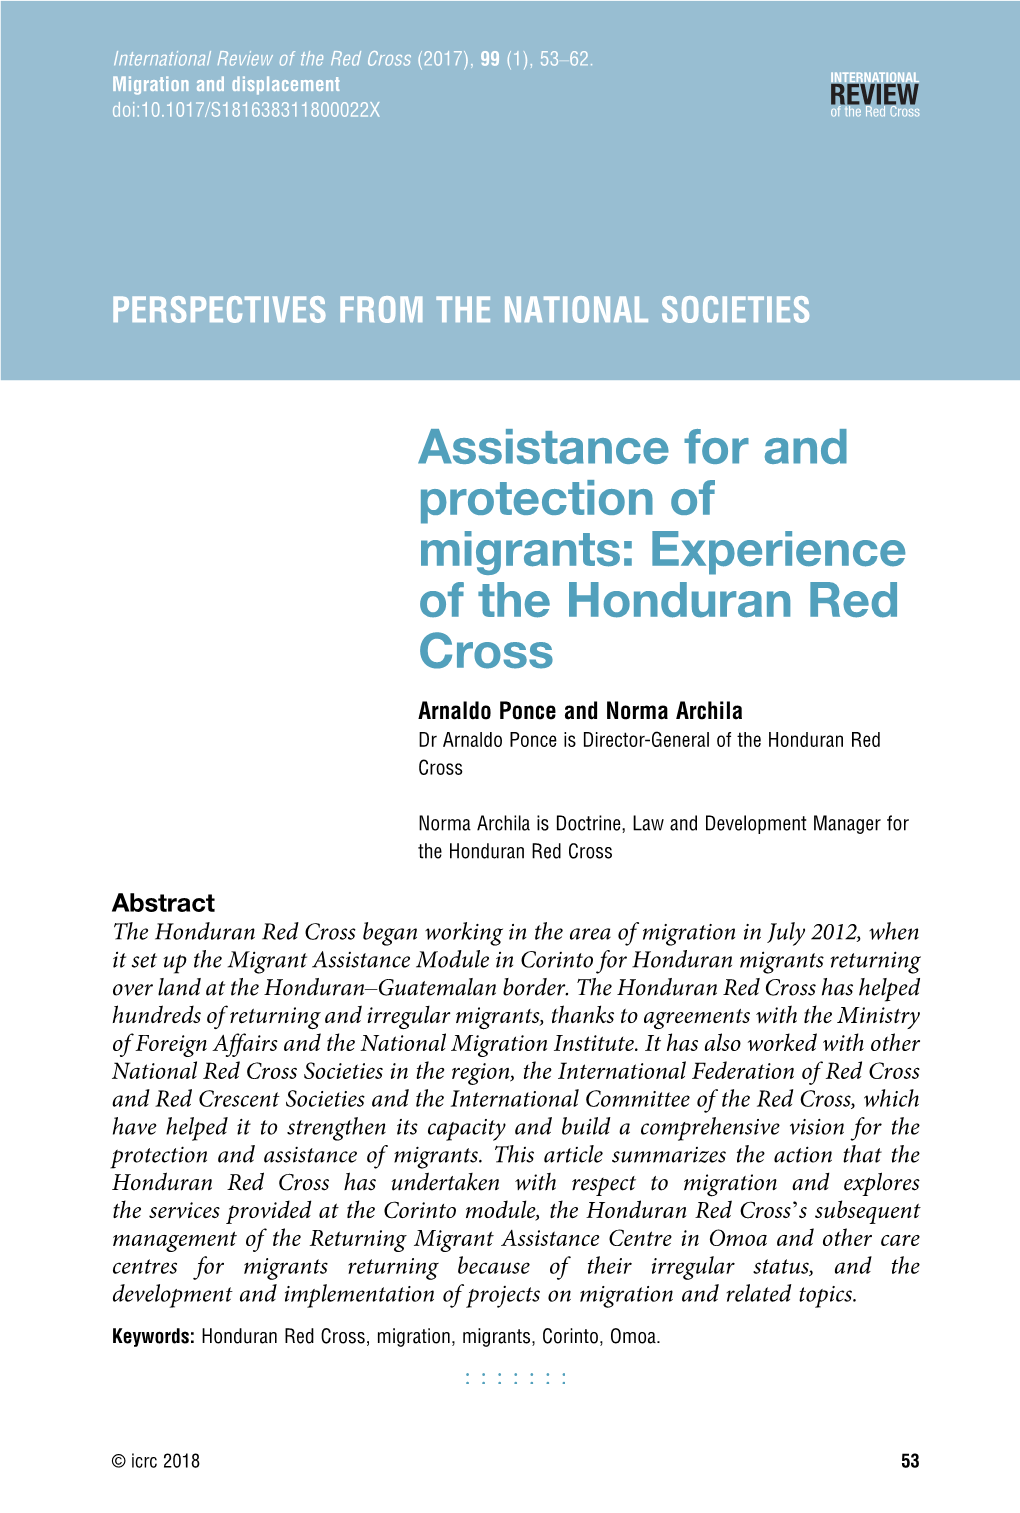 Assistance for and Protection of Migrants: Experience of the Honduran Red Cross